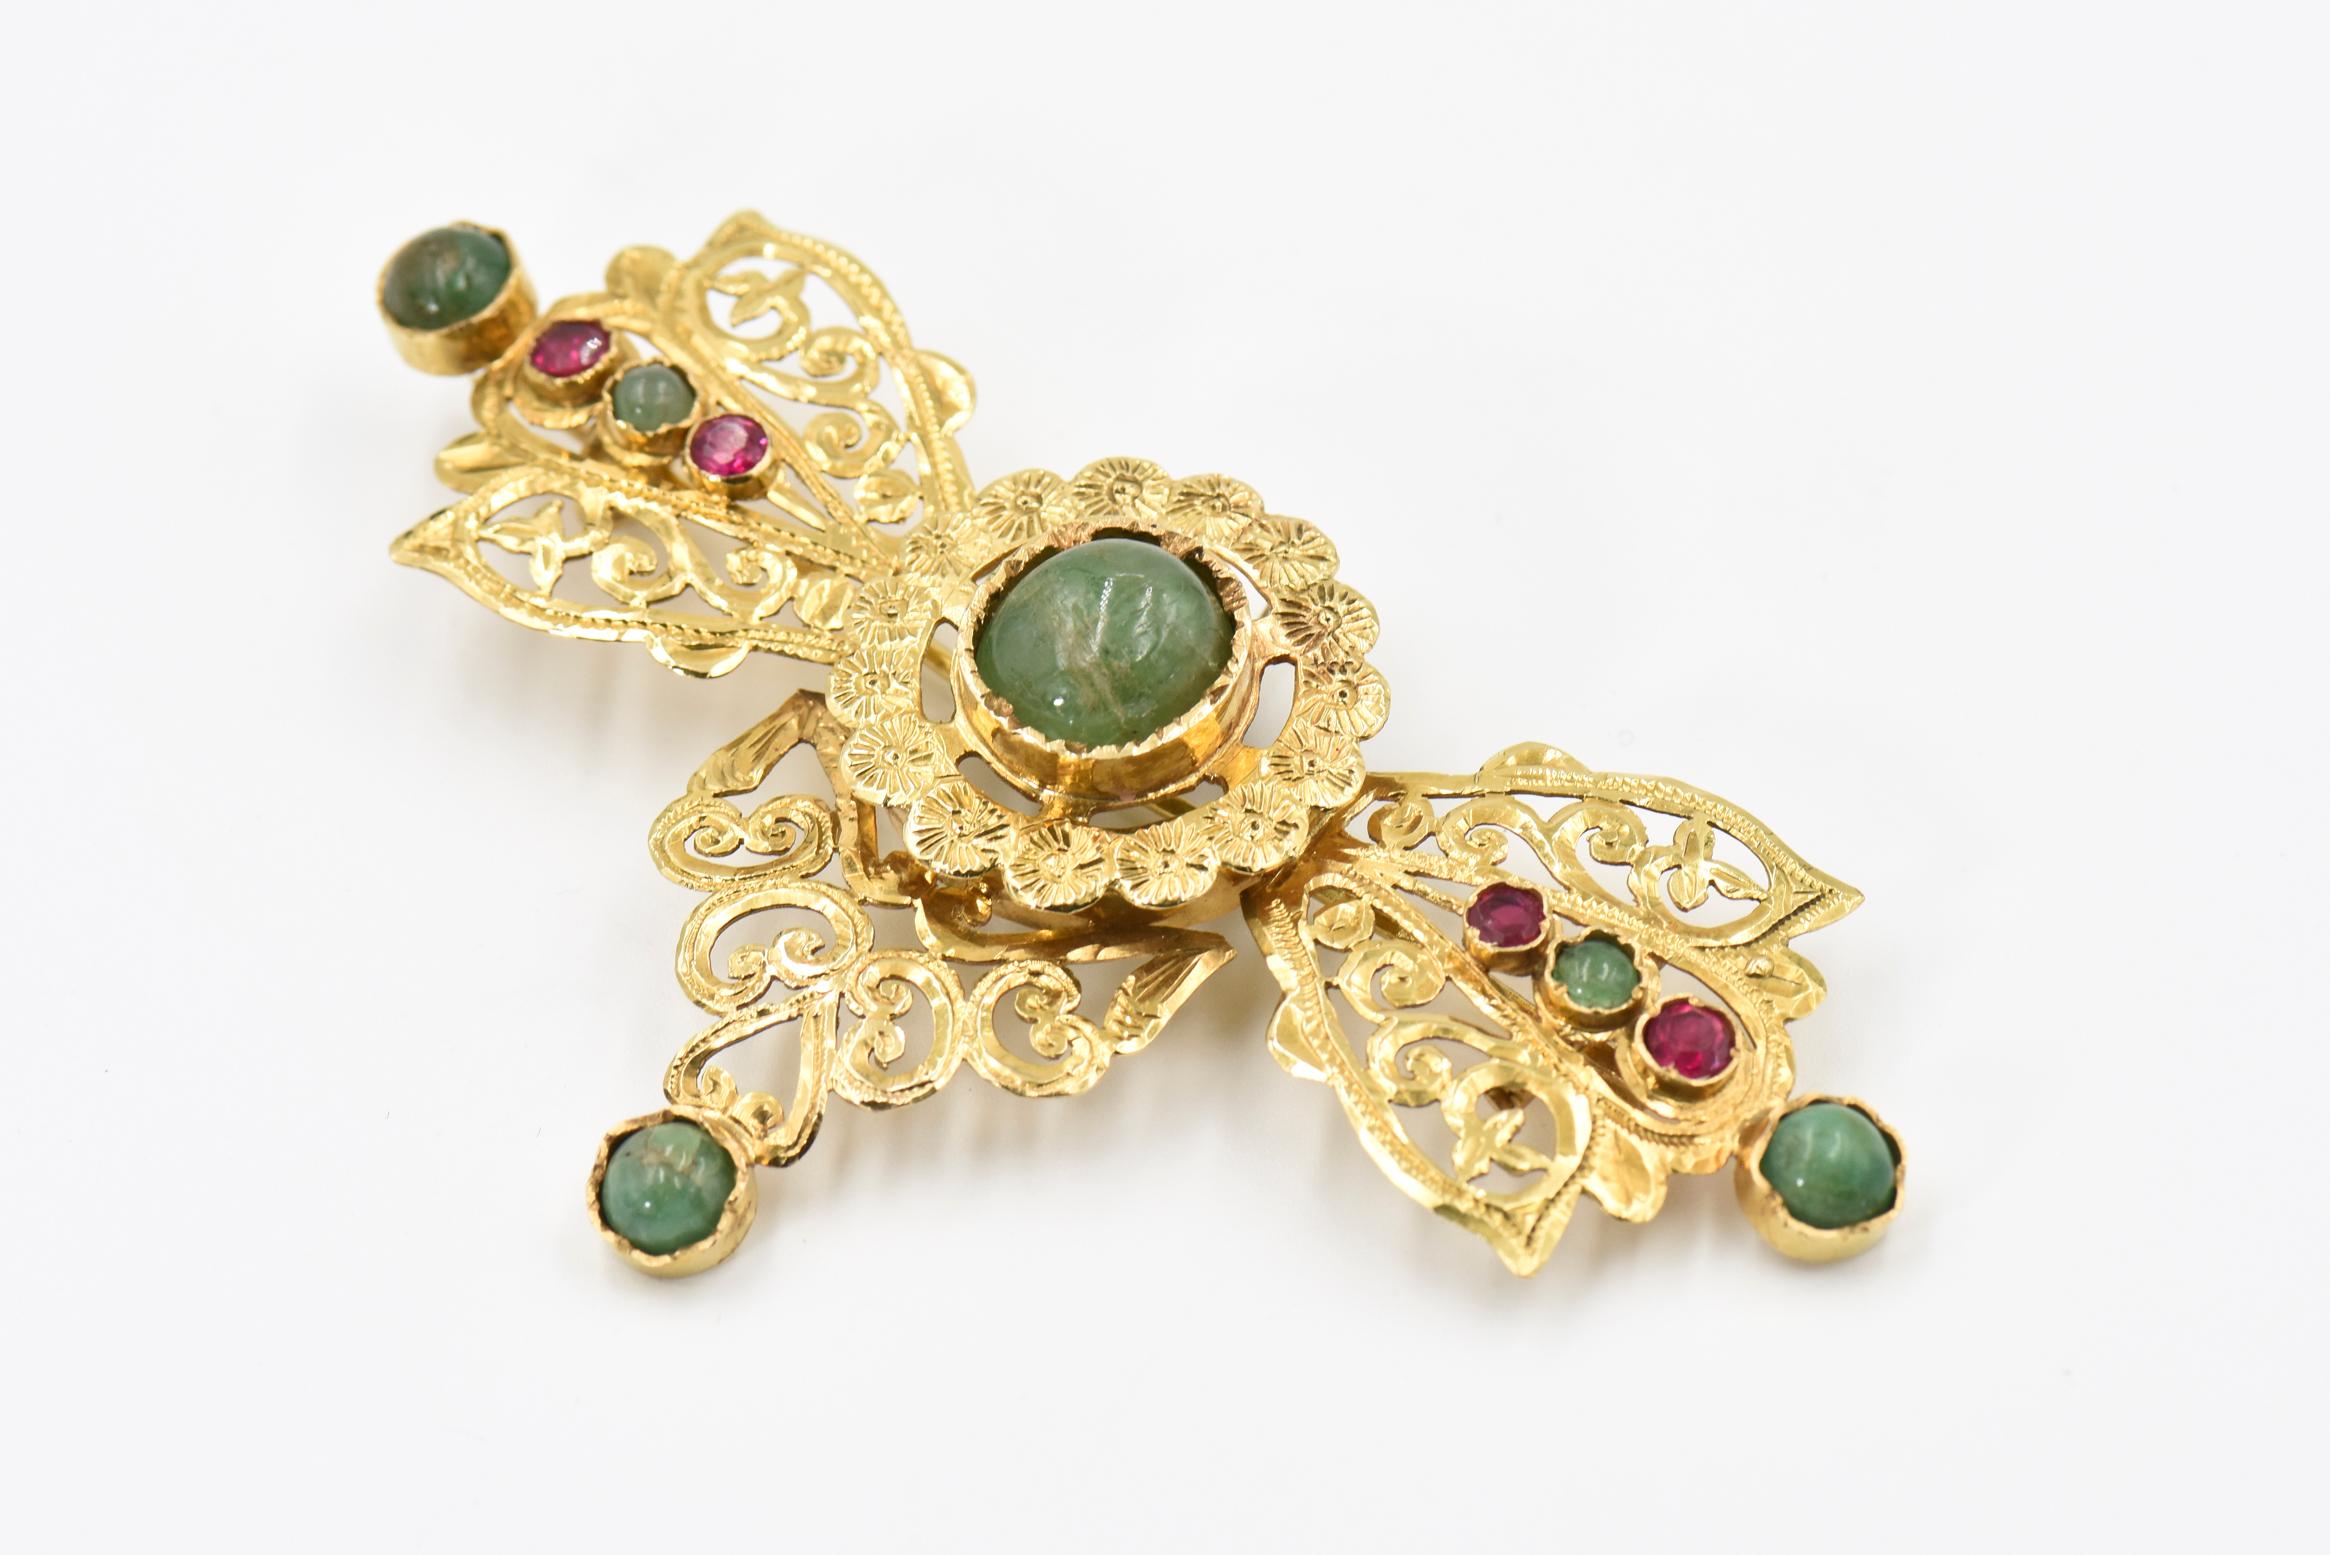 Dramatic 18k yellow gold filagree bow brooch pendant featuring a leaf and scroll design accented with cabochon emerald and man made faceted rubies.  The back has a 